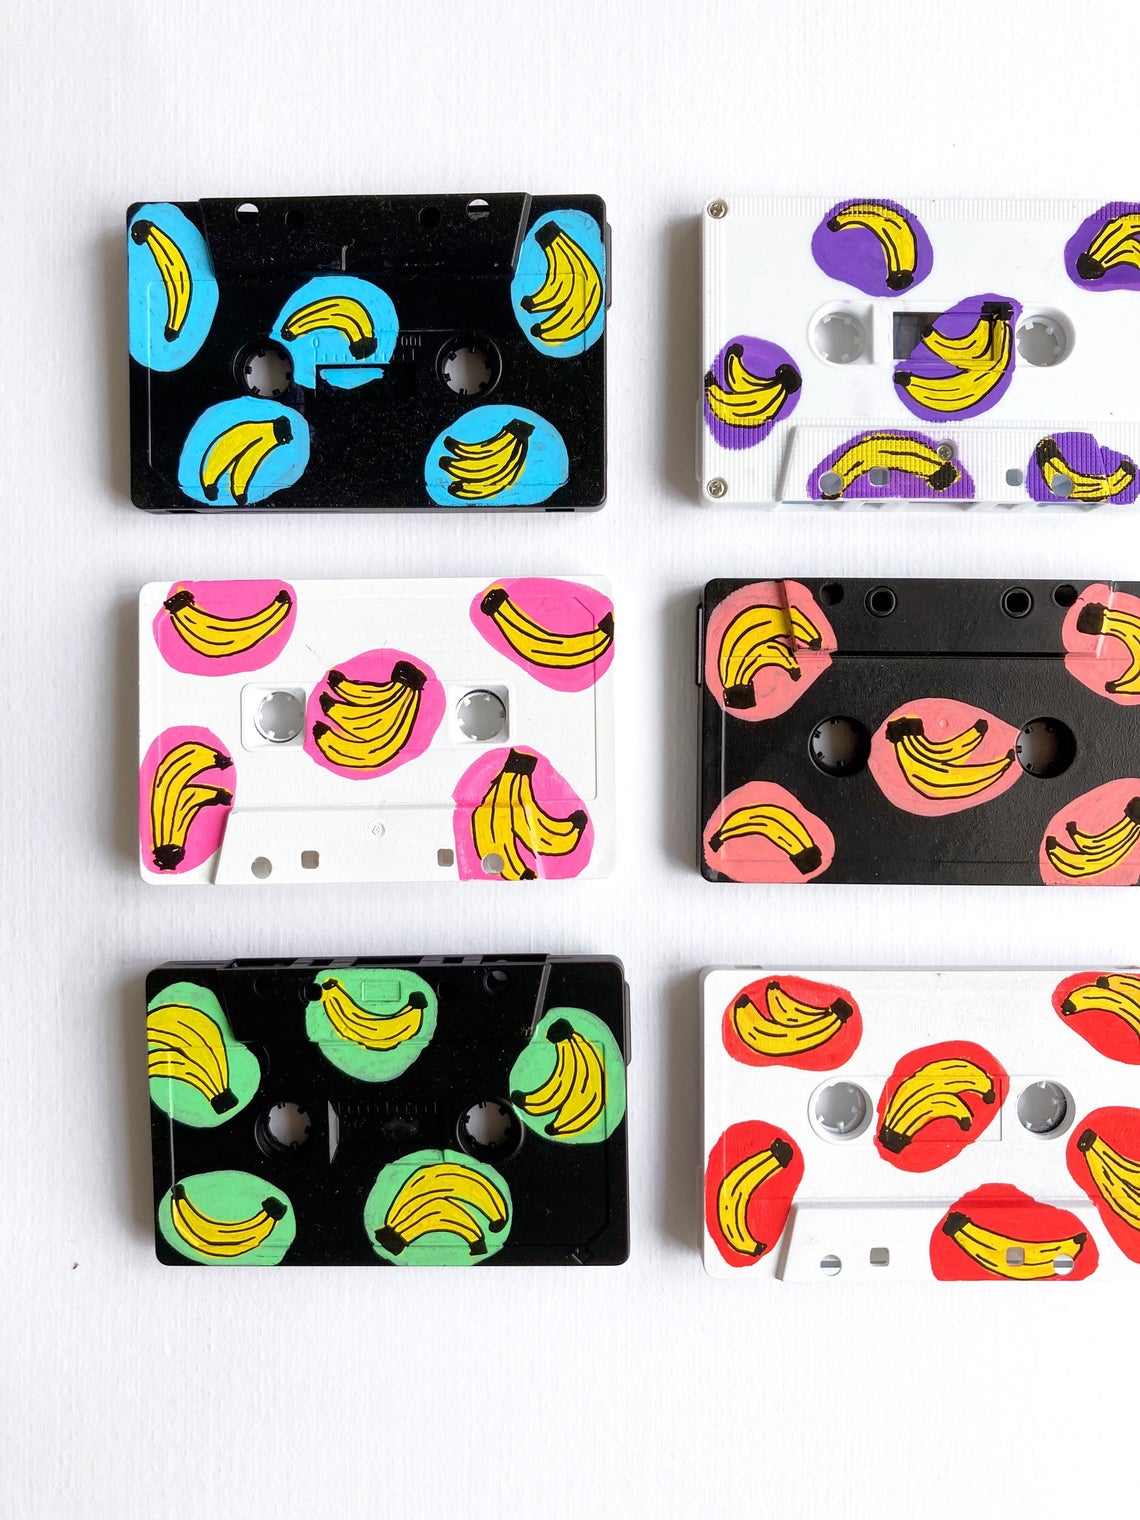 Retro interiors with old cassette tapes. Artist = Wooden Flamingo